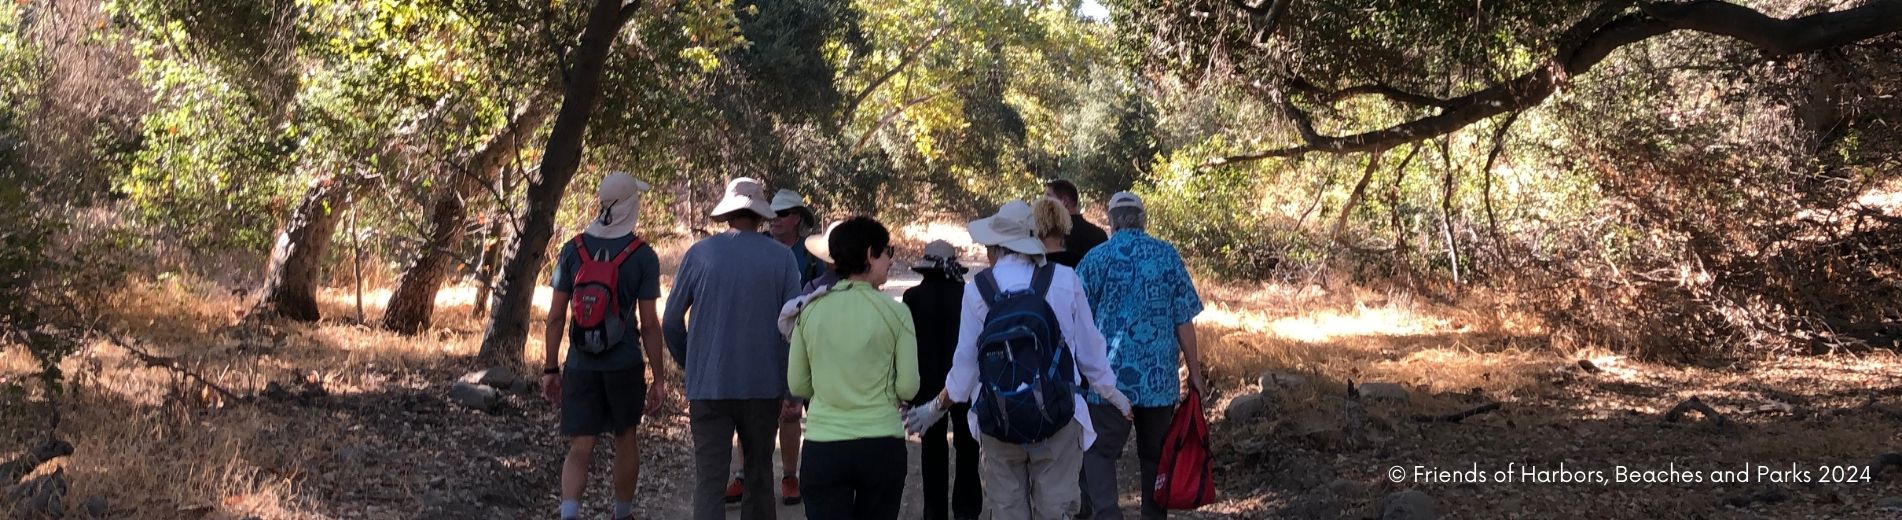 Group hiking in O'Neil Regional Park in the shade of Oak trees.